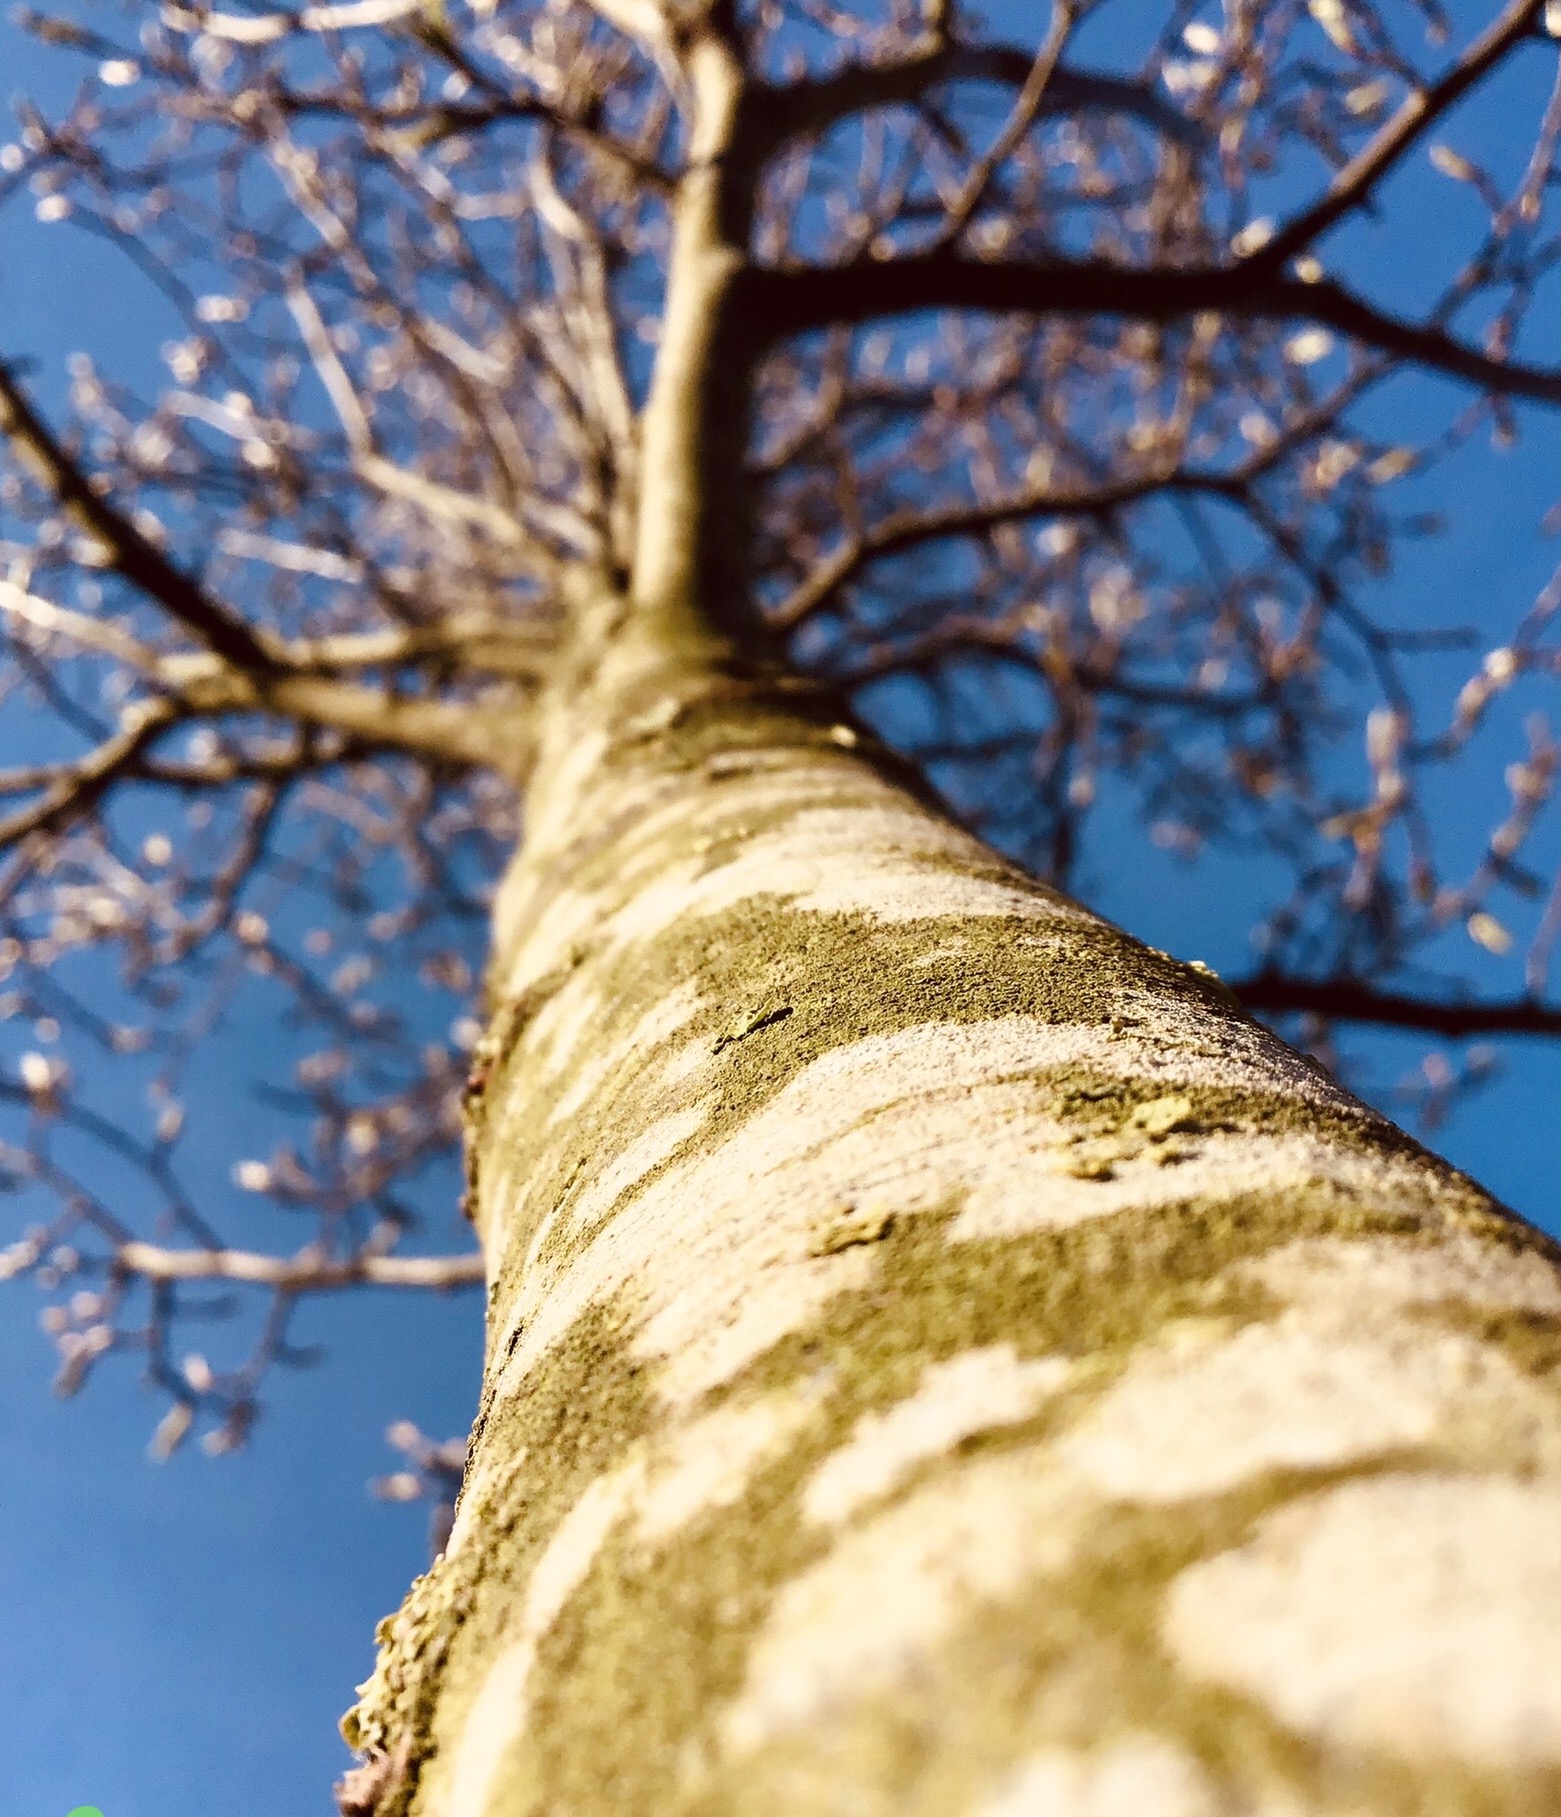 This image is a picture of a look up along a beech tree that's lost its leaves, to a clear blue sky